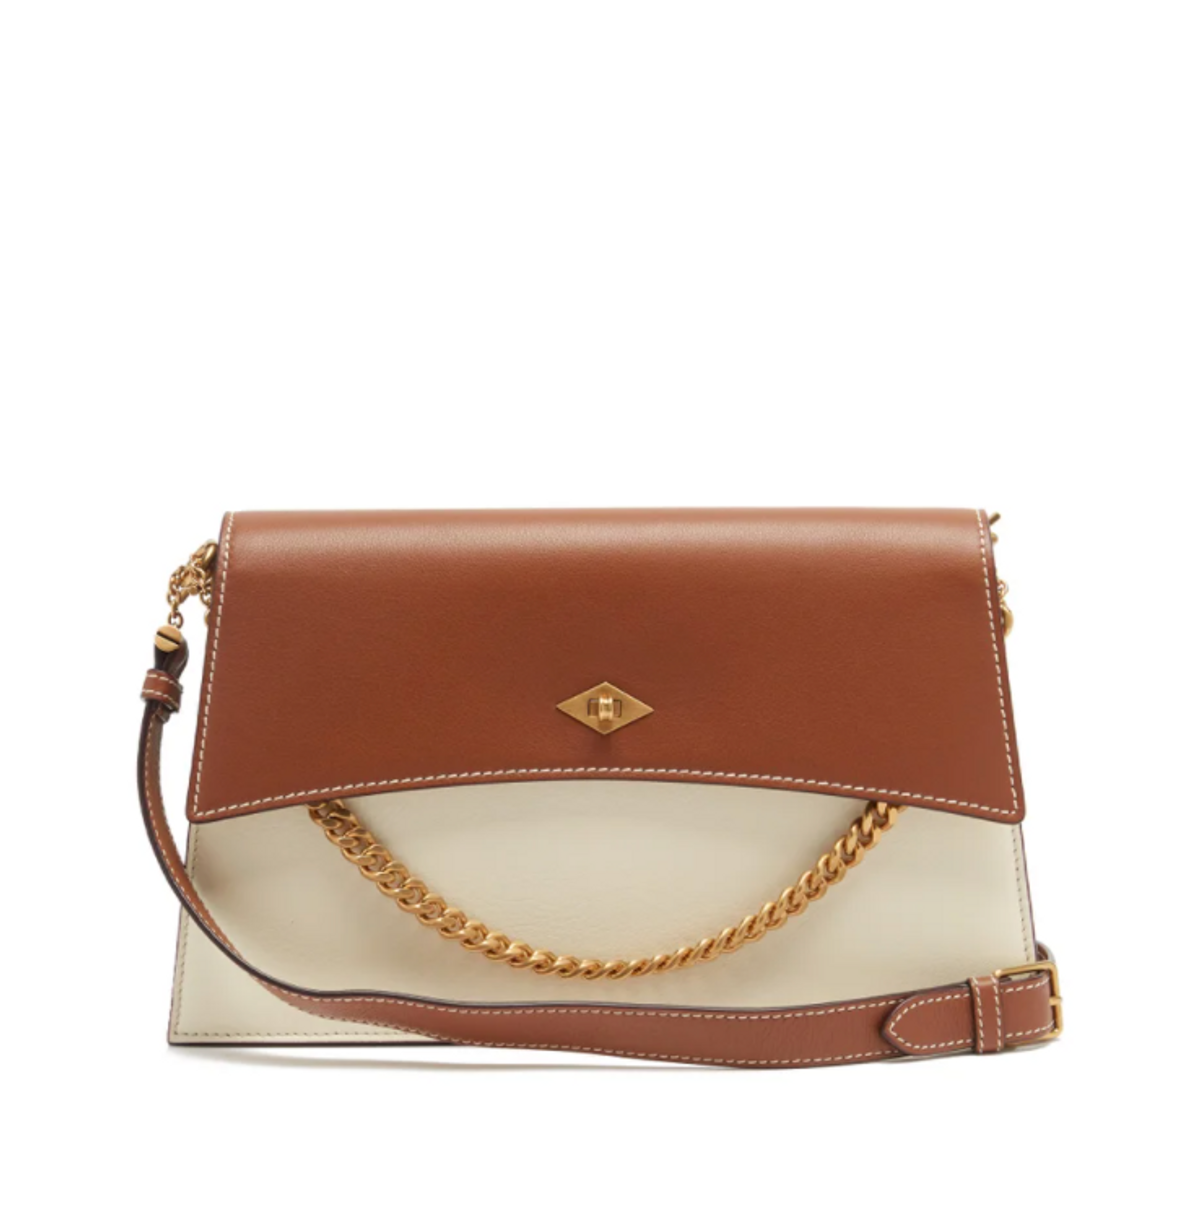 Roma Small Leather Shoulder Bag